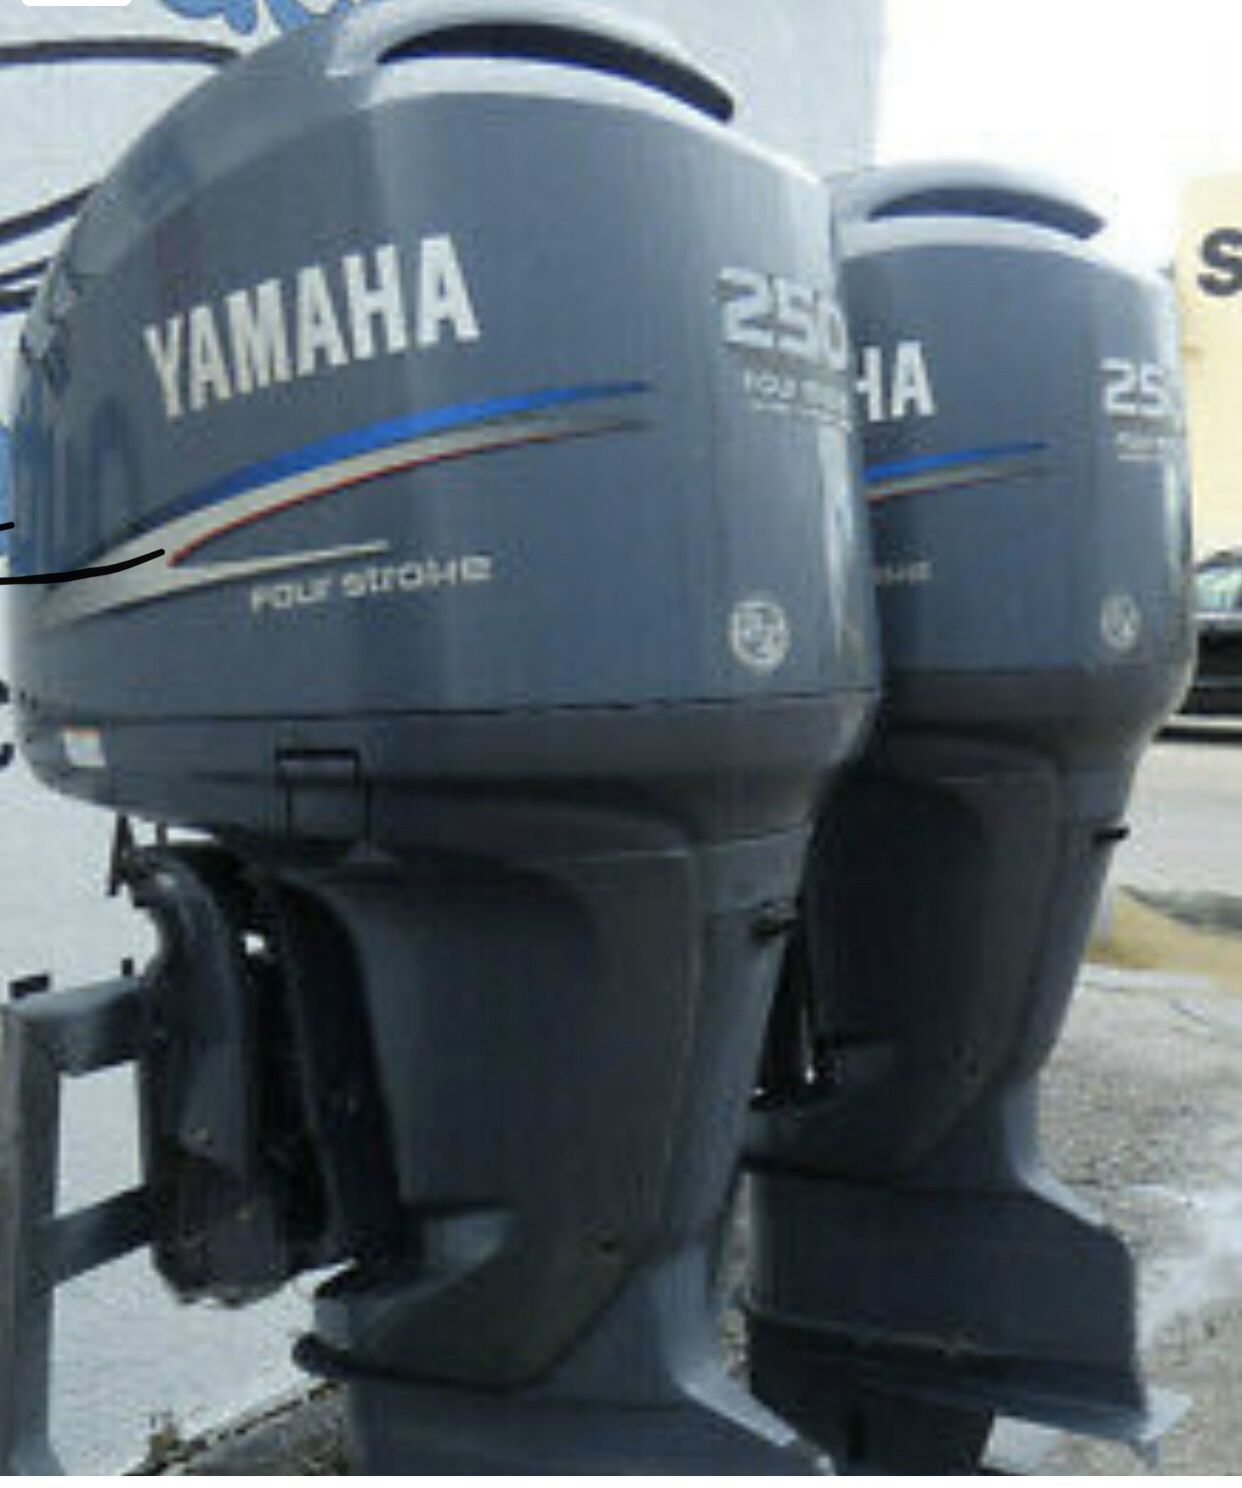 PAIR 2008 250HP YAMAHA FOUR STROKE OUTBOARD MOTOR WITH 25" SHAFTS